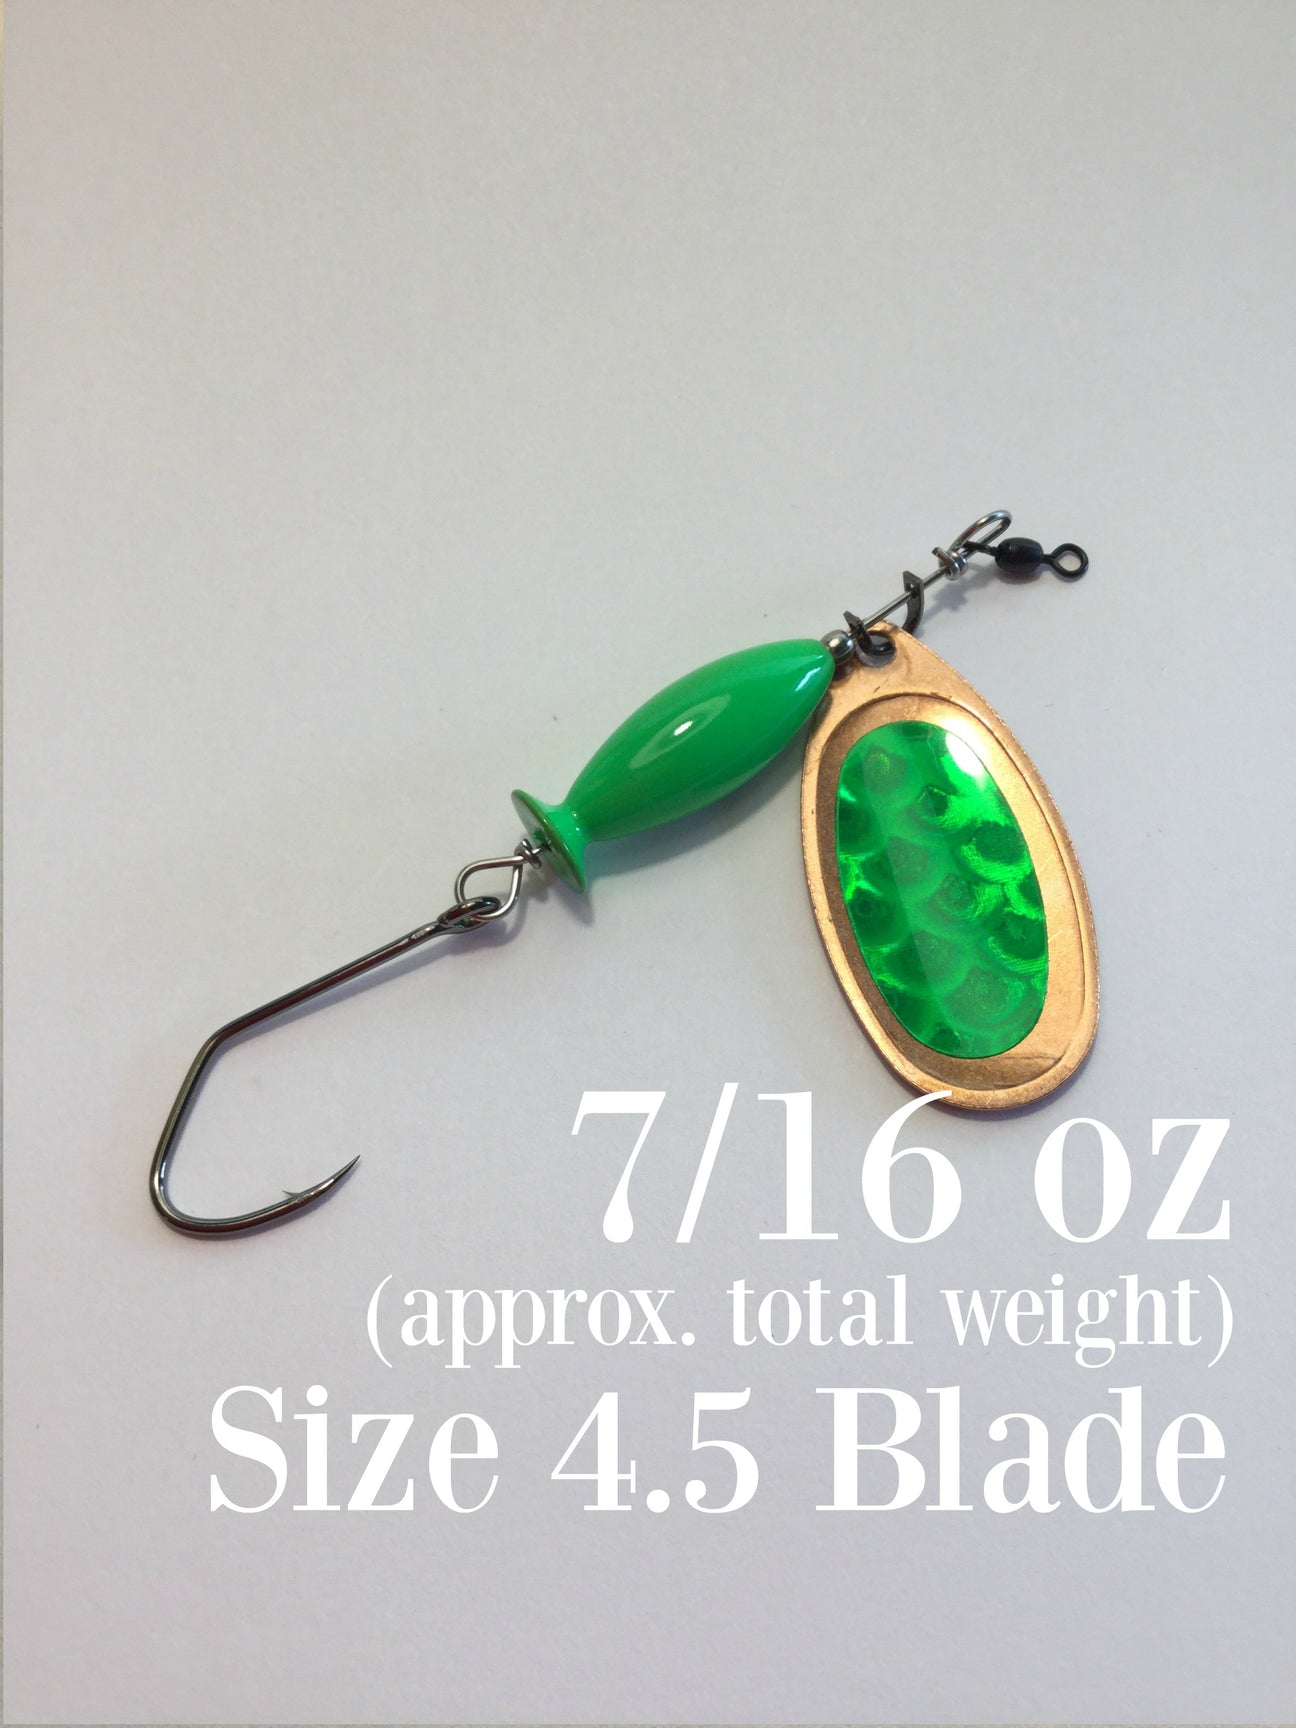 CHROME MAGNET: Green Body, Copper Blade Weighted Spinner